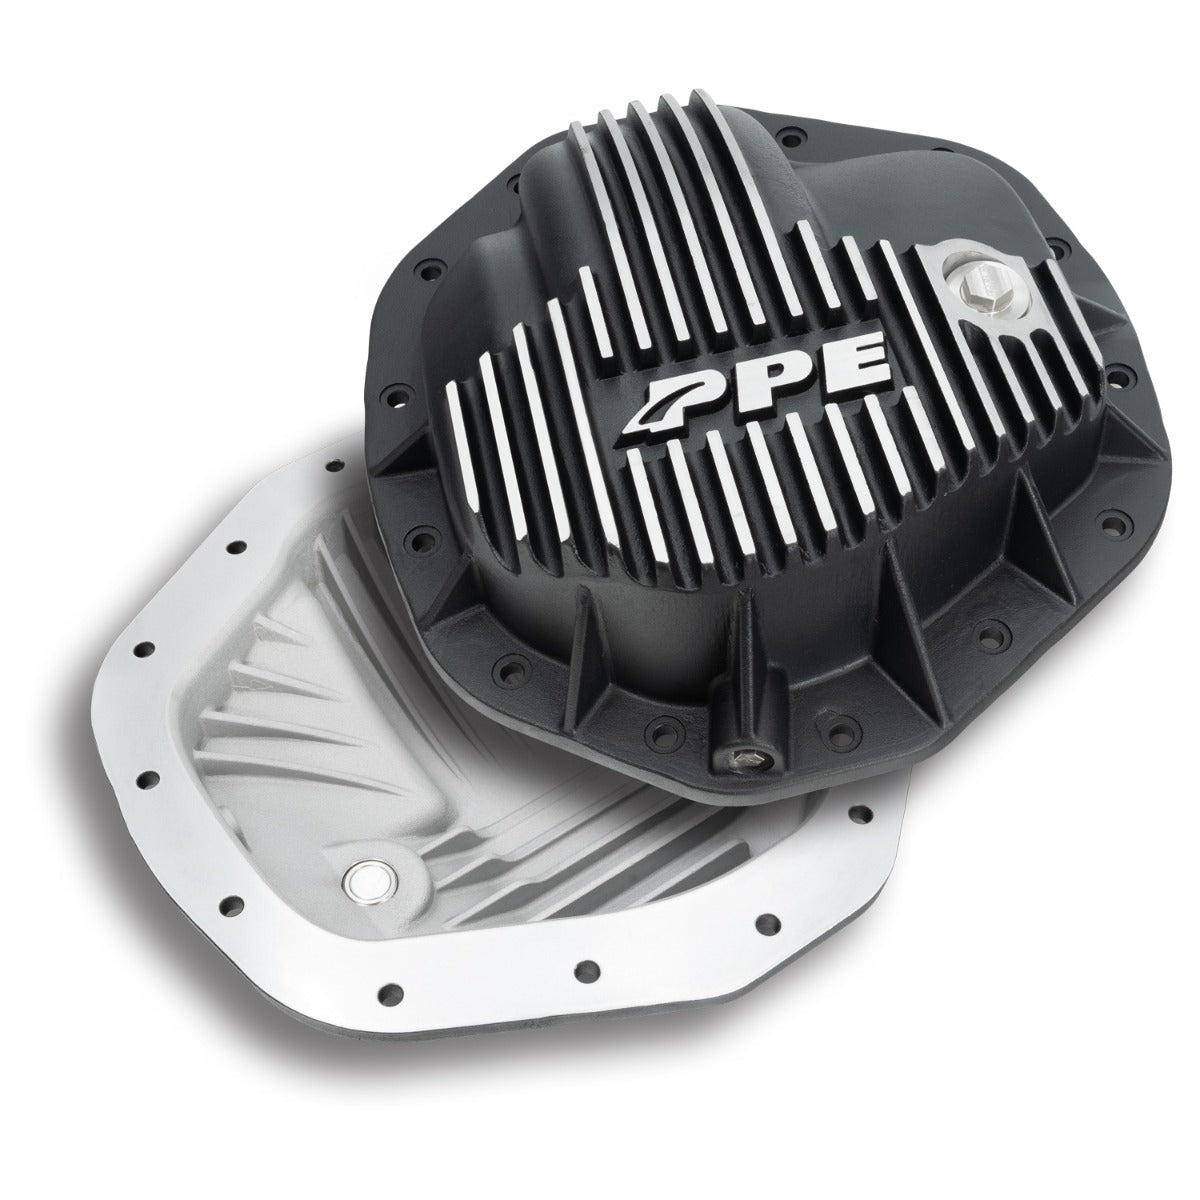 2020-2024 GM 6.6L Duramax 11.5"/12"-14 Heavy-Duty Cast Aluminum Rear Differential Cover ppepower